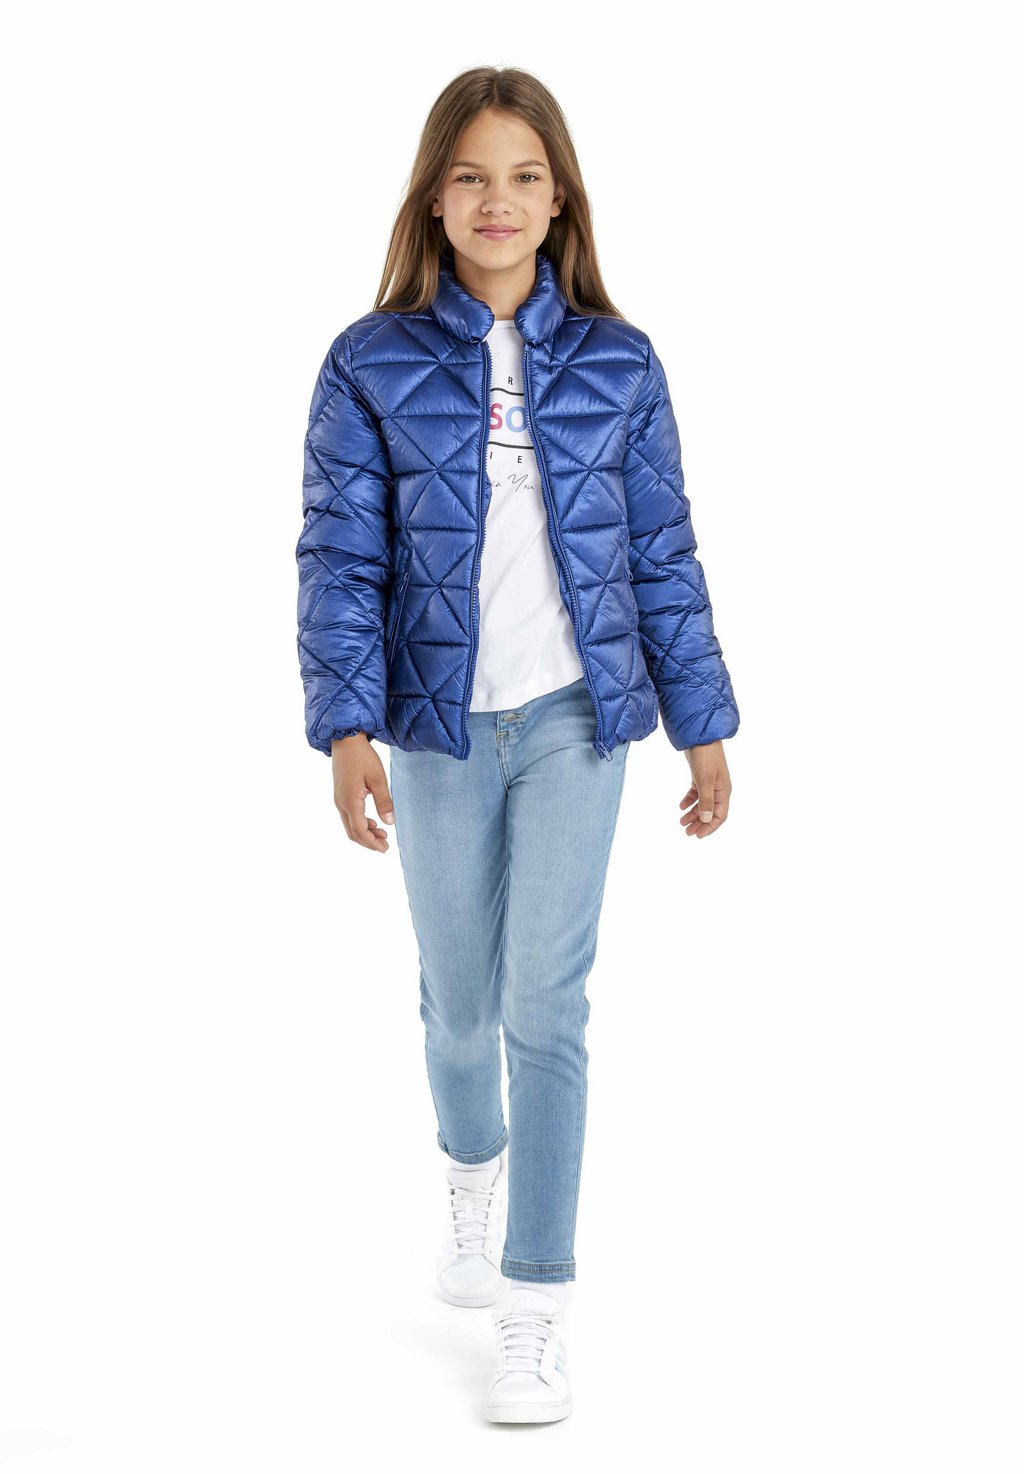 Легкая куртка QUILTED PUFFER MINOTI, цвет dark blue легкая куртка hooded puffer minoti цвет dark blue